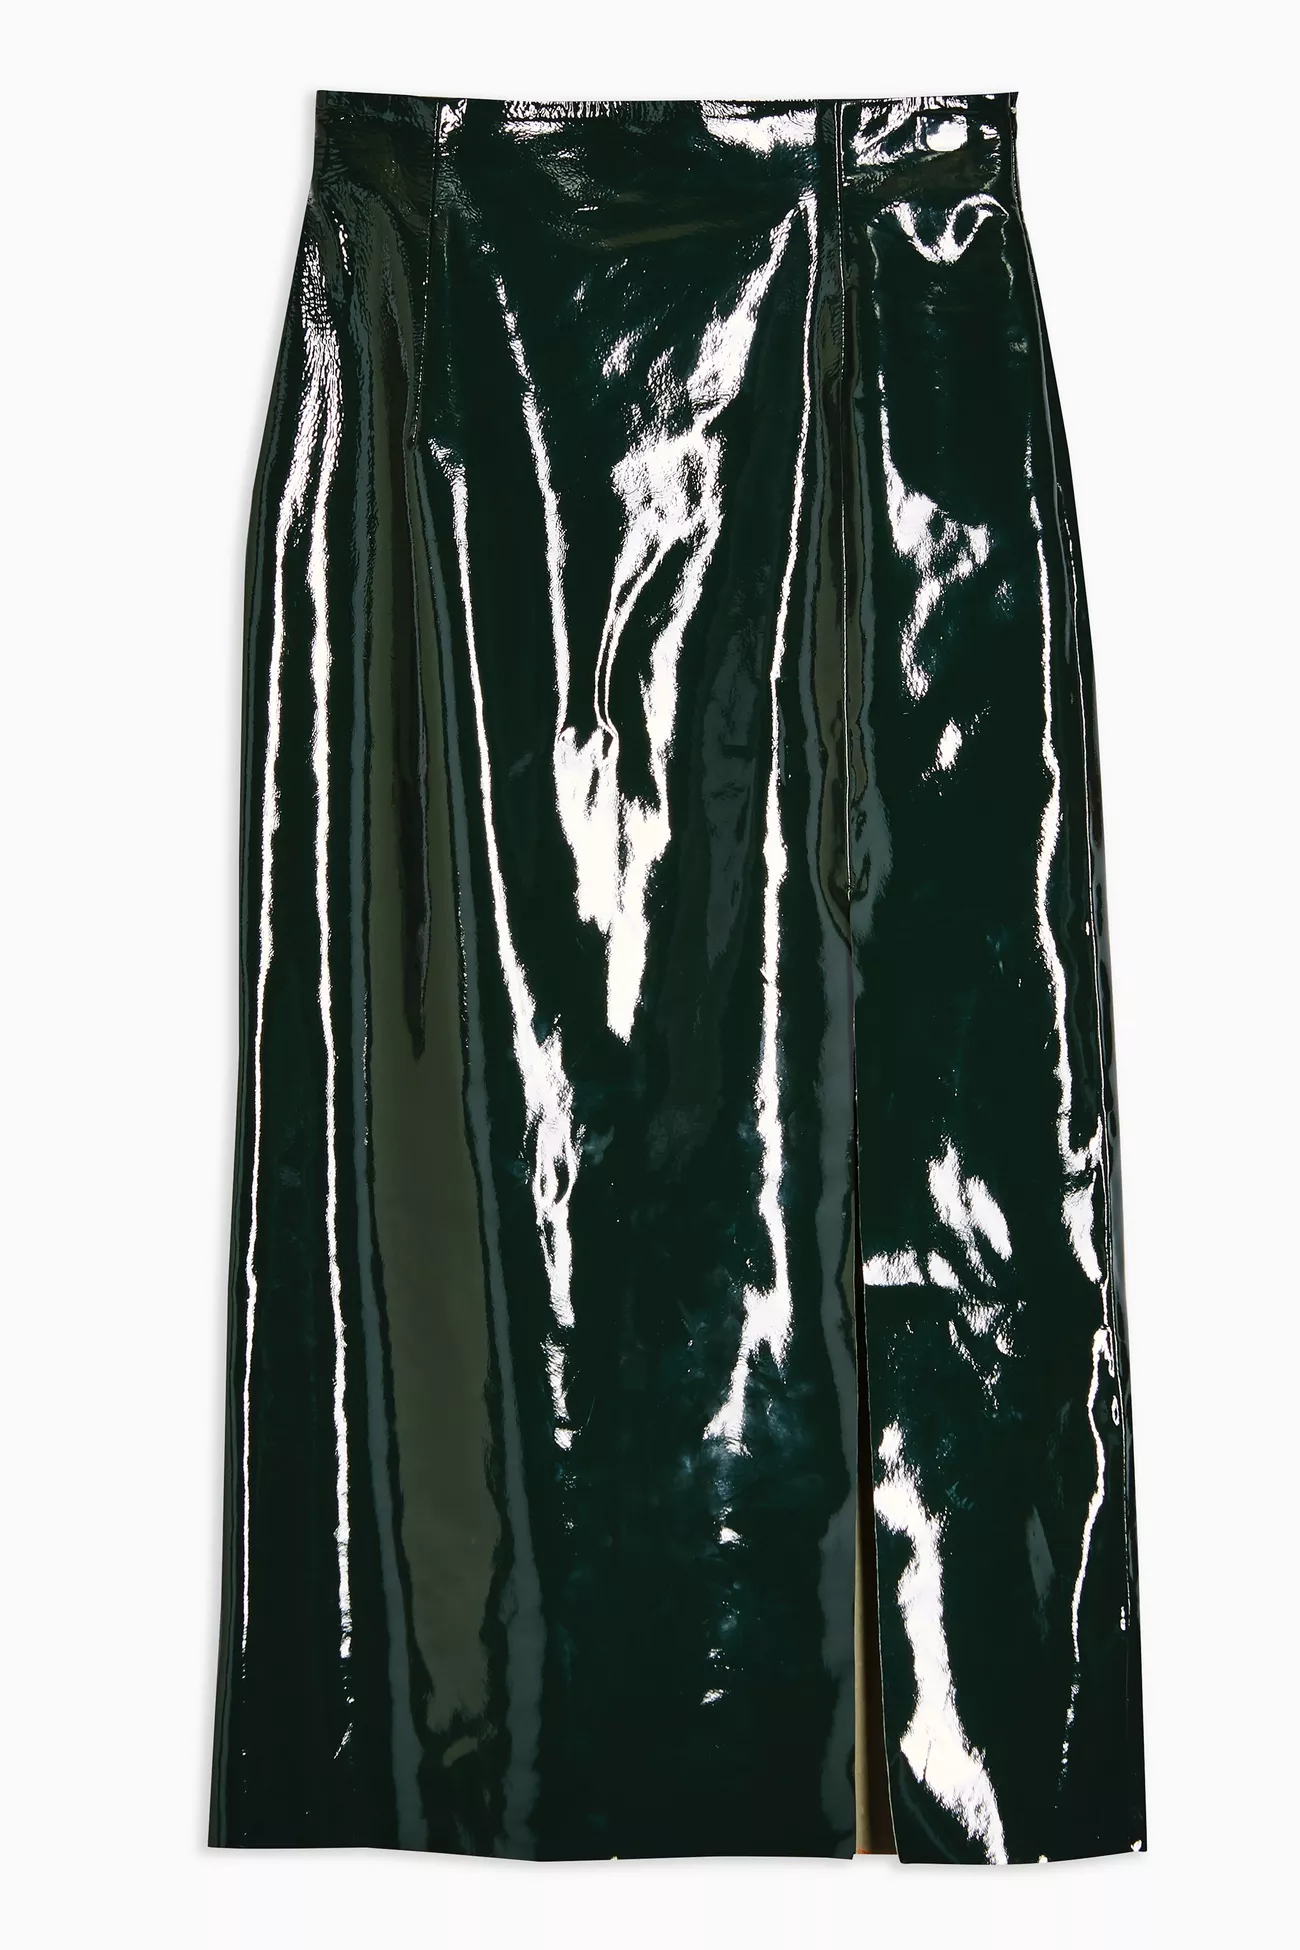 patent leather shirt topshop